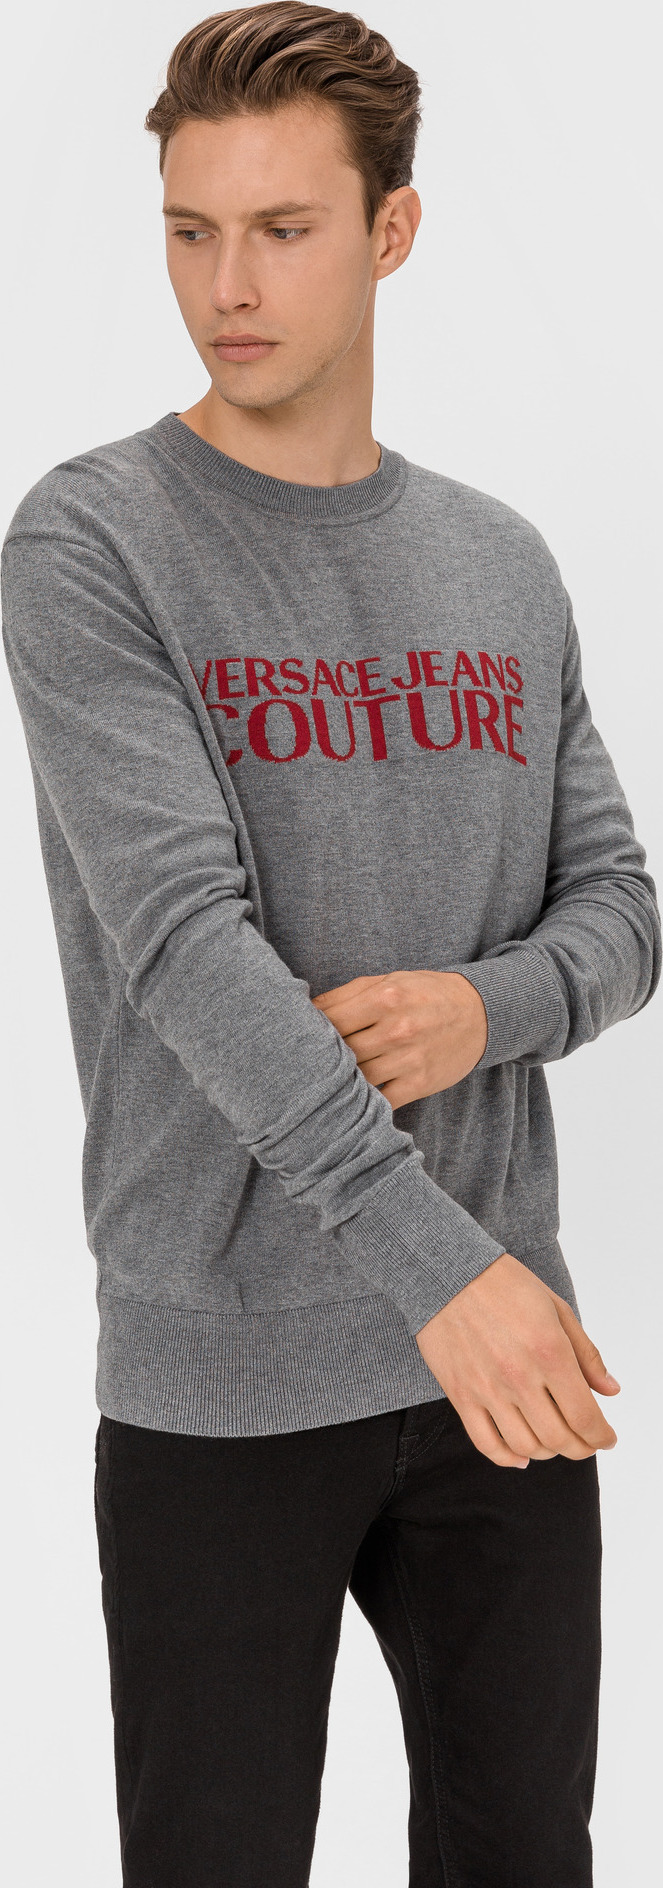 Mikina Versace Jeans Couture Šedá Versace Jeans Couture